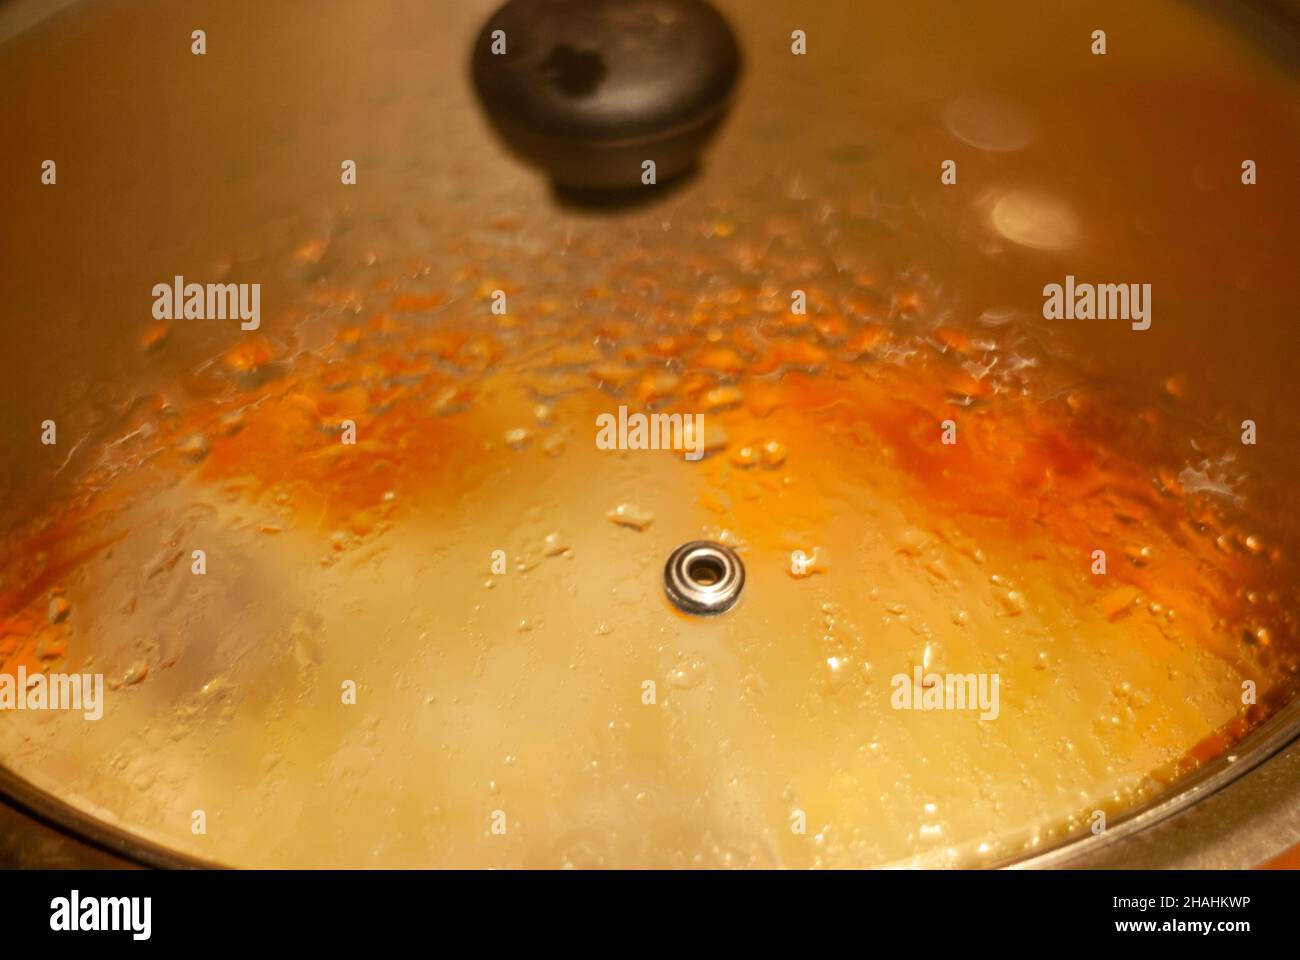 Steam condensation in covered kitchen pot transparent to the fire cooking Stock Photo